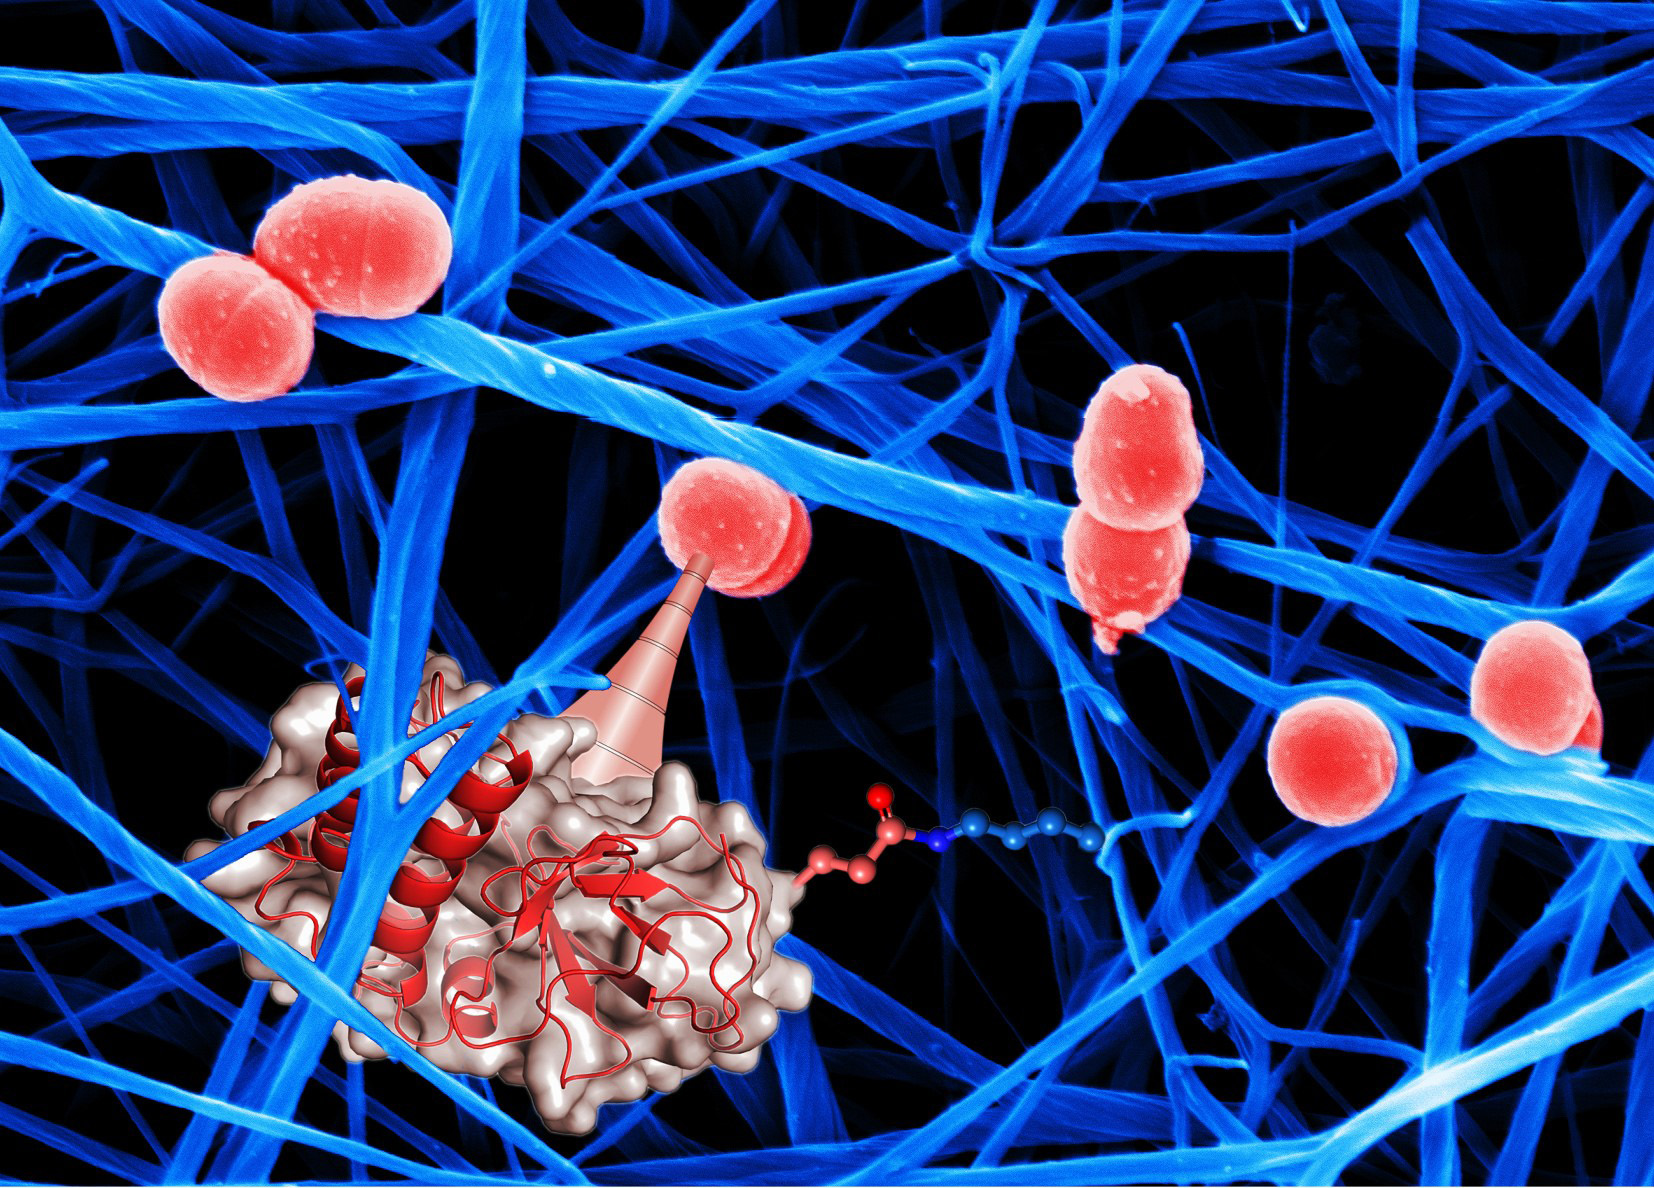 Electron micrograph of bacteria (in red, diameter is one thousand of a millimetre) attached to fibres of the human protein fibrin (in blue) as it would be found in blood clots. The bacteria are equipped with a ”chemical harpoon” (protein structure shown in grey and red) on their surface that anchors them to the human protein by forming a very strong bond.